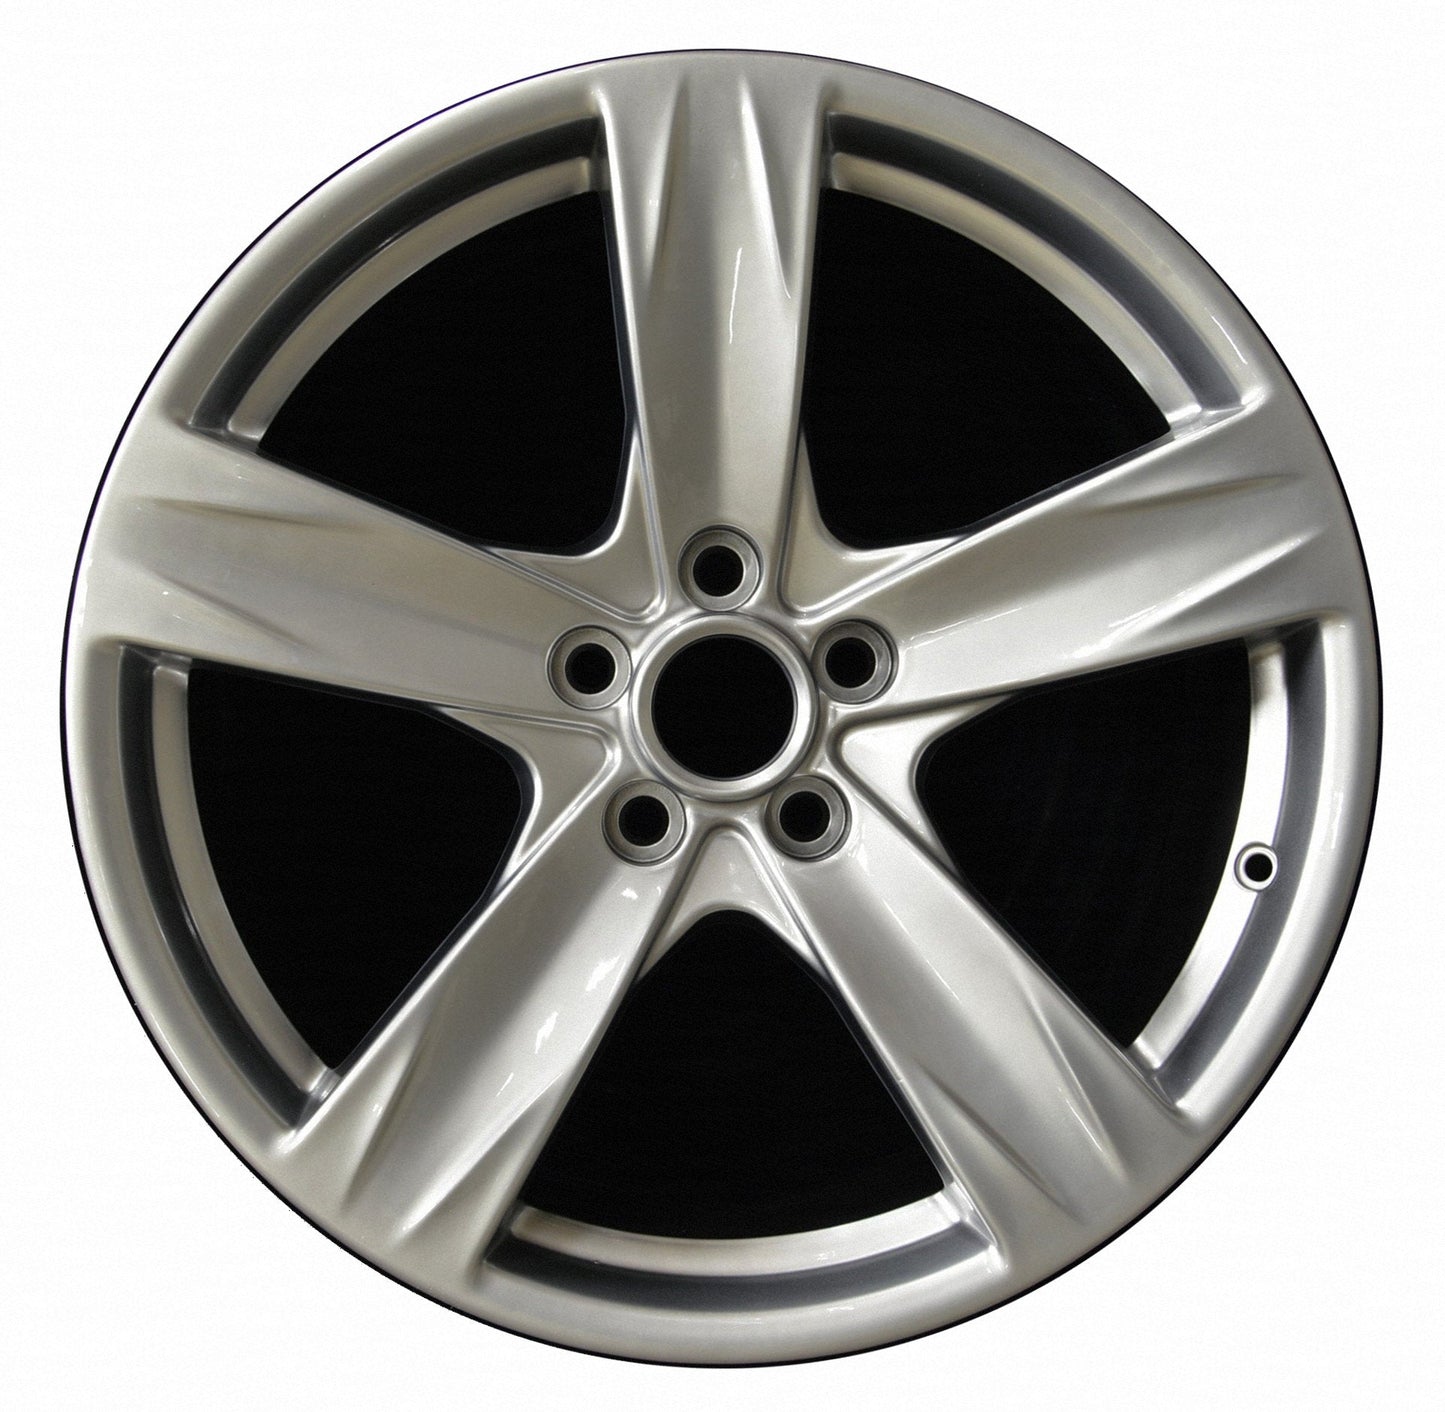 Ford Mustang  2012, 2013, 2014 Factory OEM Car Wheel Size 19x8.5 Alloy WAO.3910.LS100V2.FFBRT